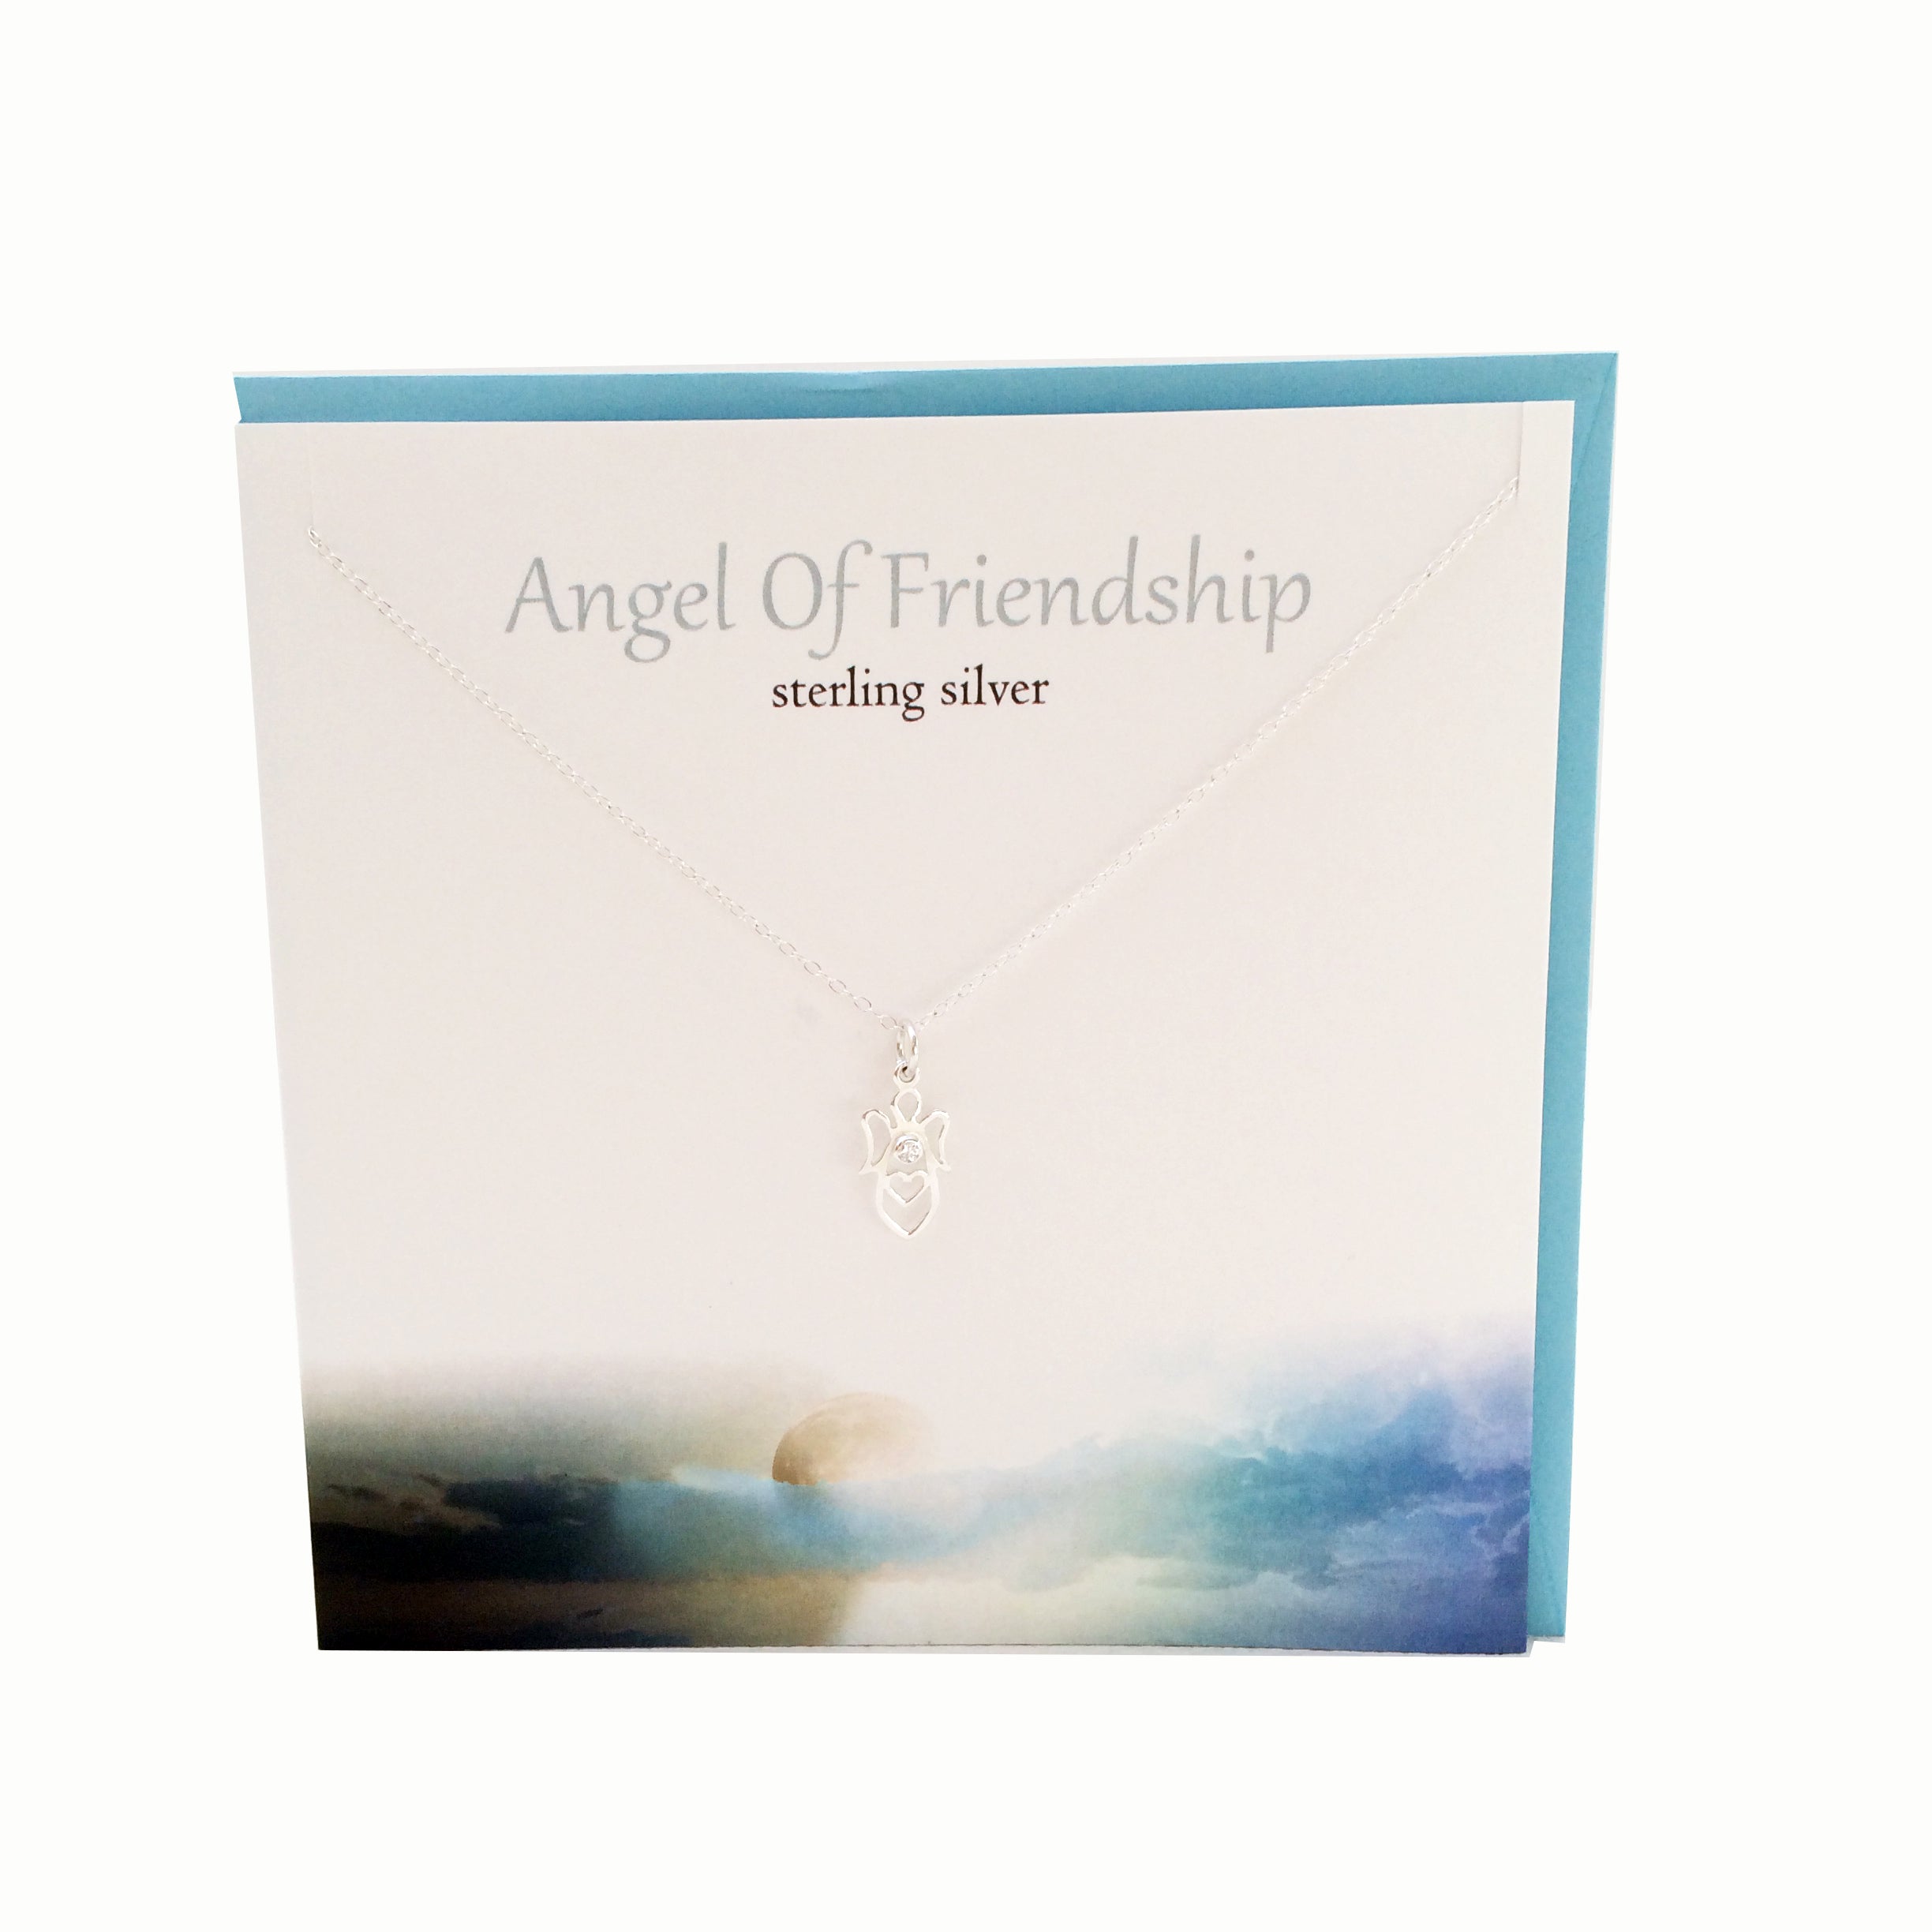 Angel of Friendship silver necklace | The Silver Studio Scotland